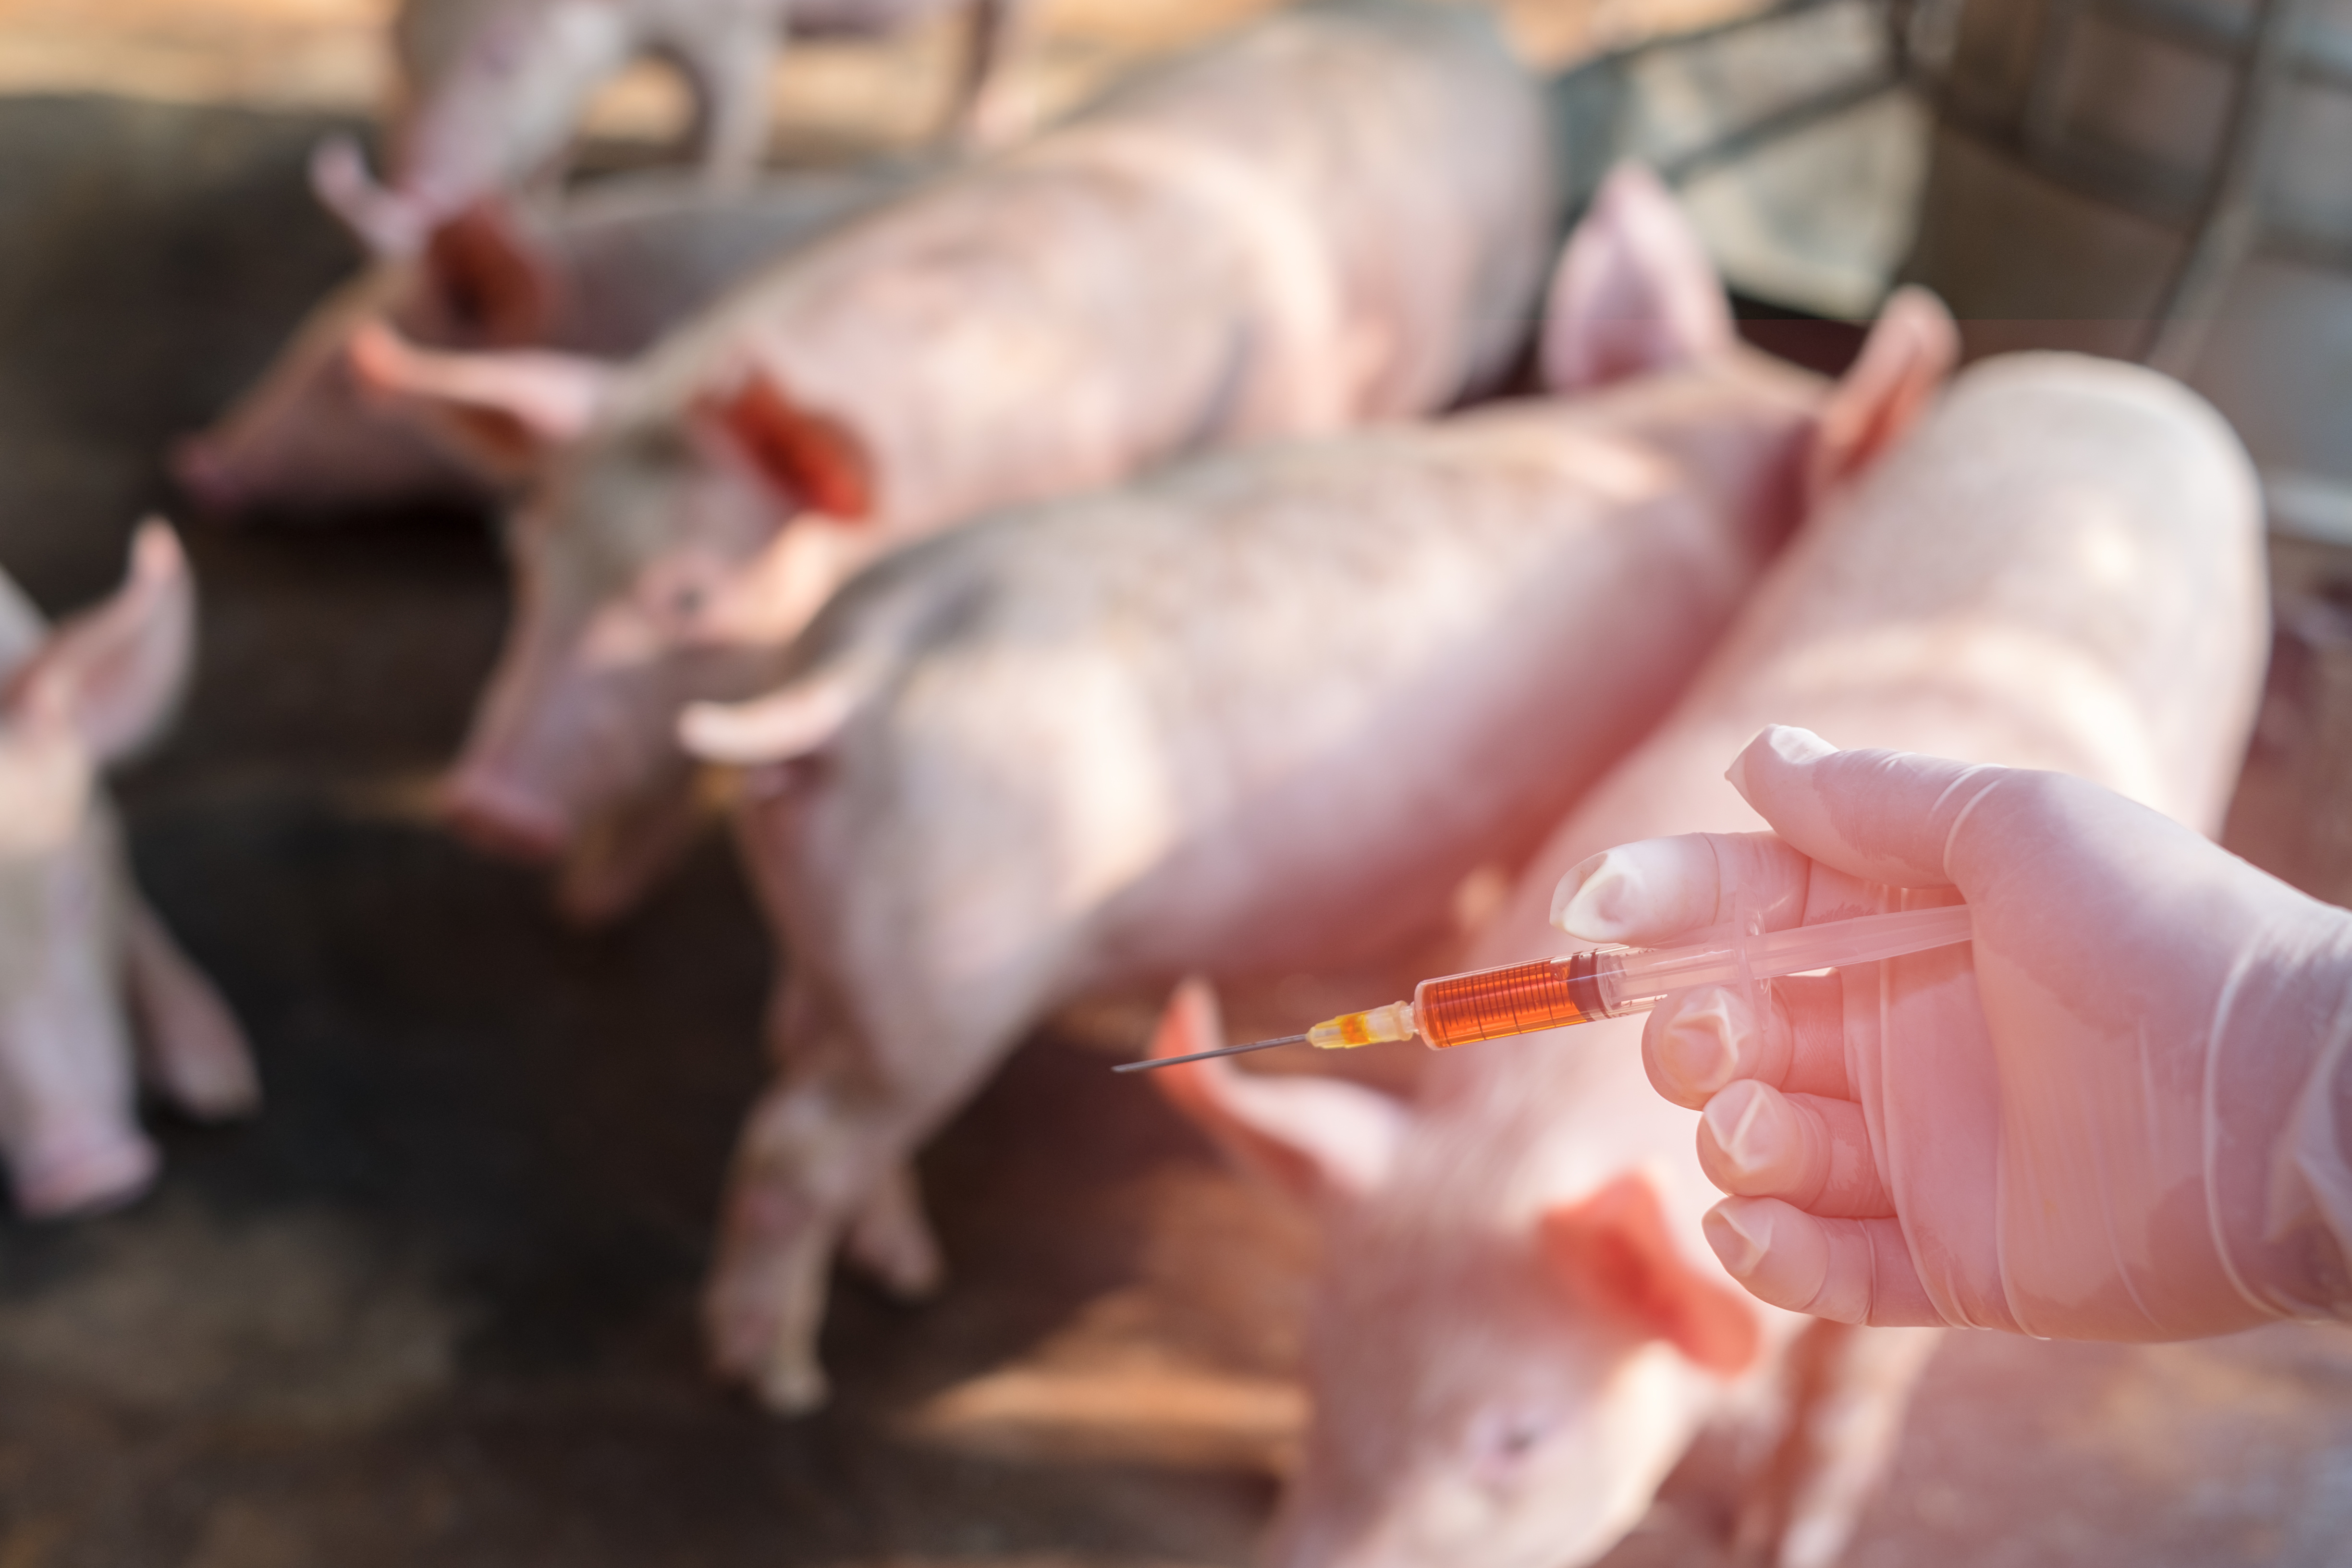 A gloved hand holding a syringe, with piglets in the background